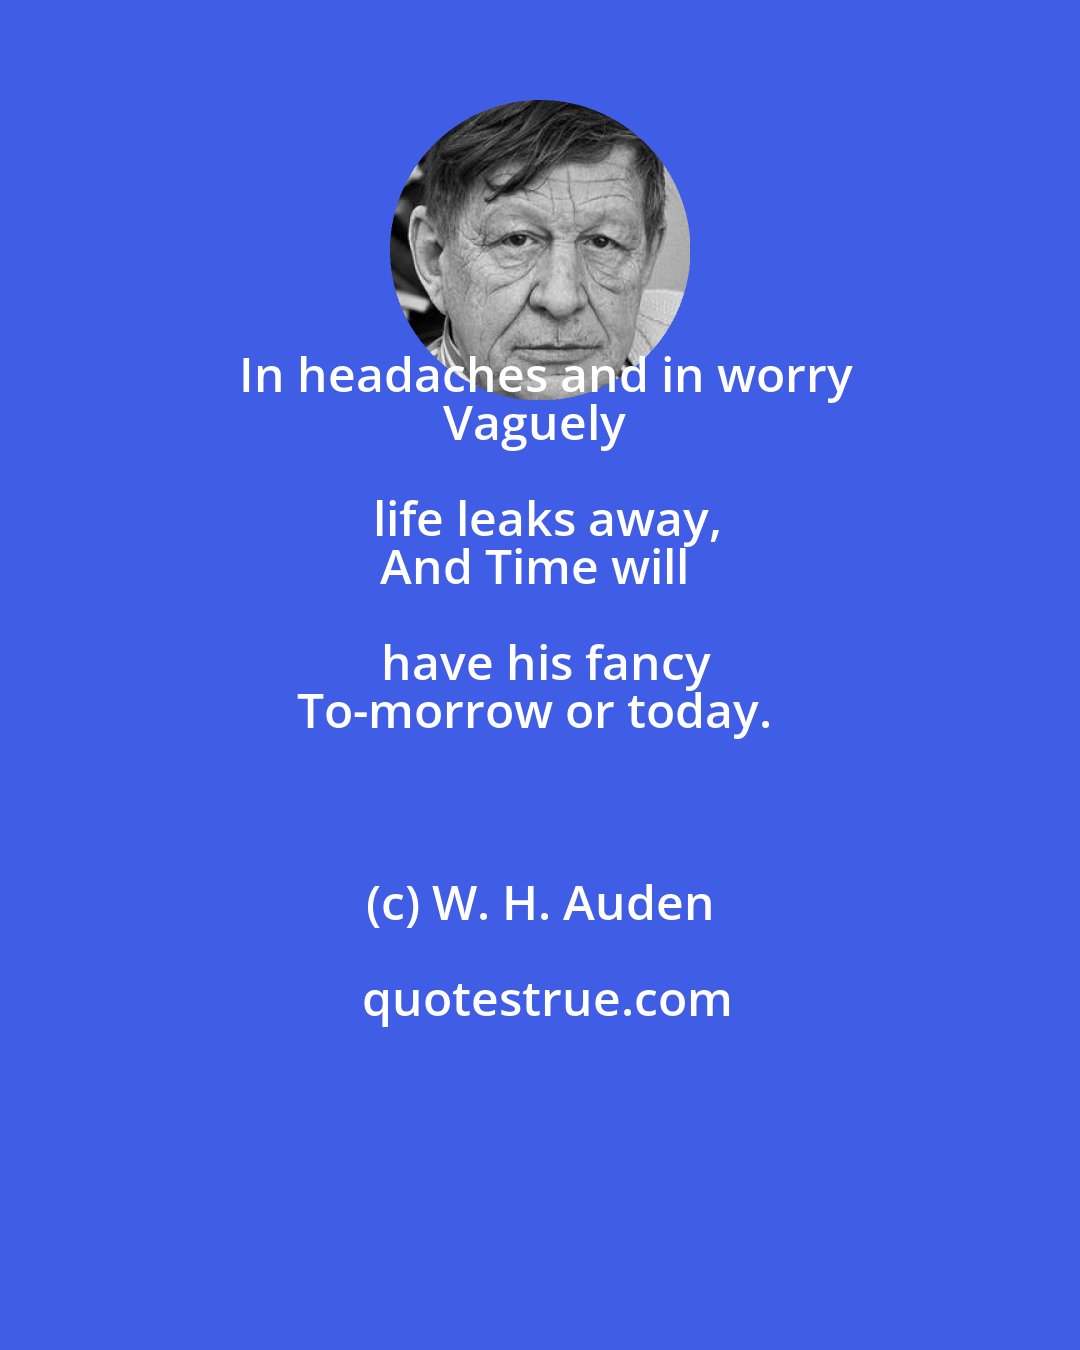 W. H. Auden: In headaches and in worry
Vaguely life leaks away,
And Time will have his fancy
To-morrow or today.